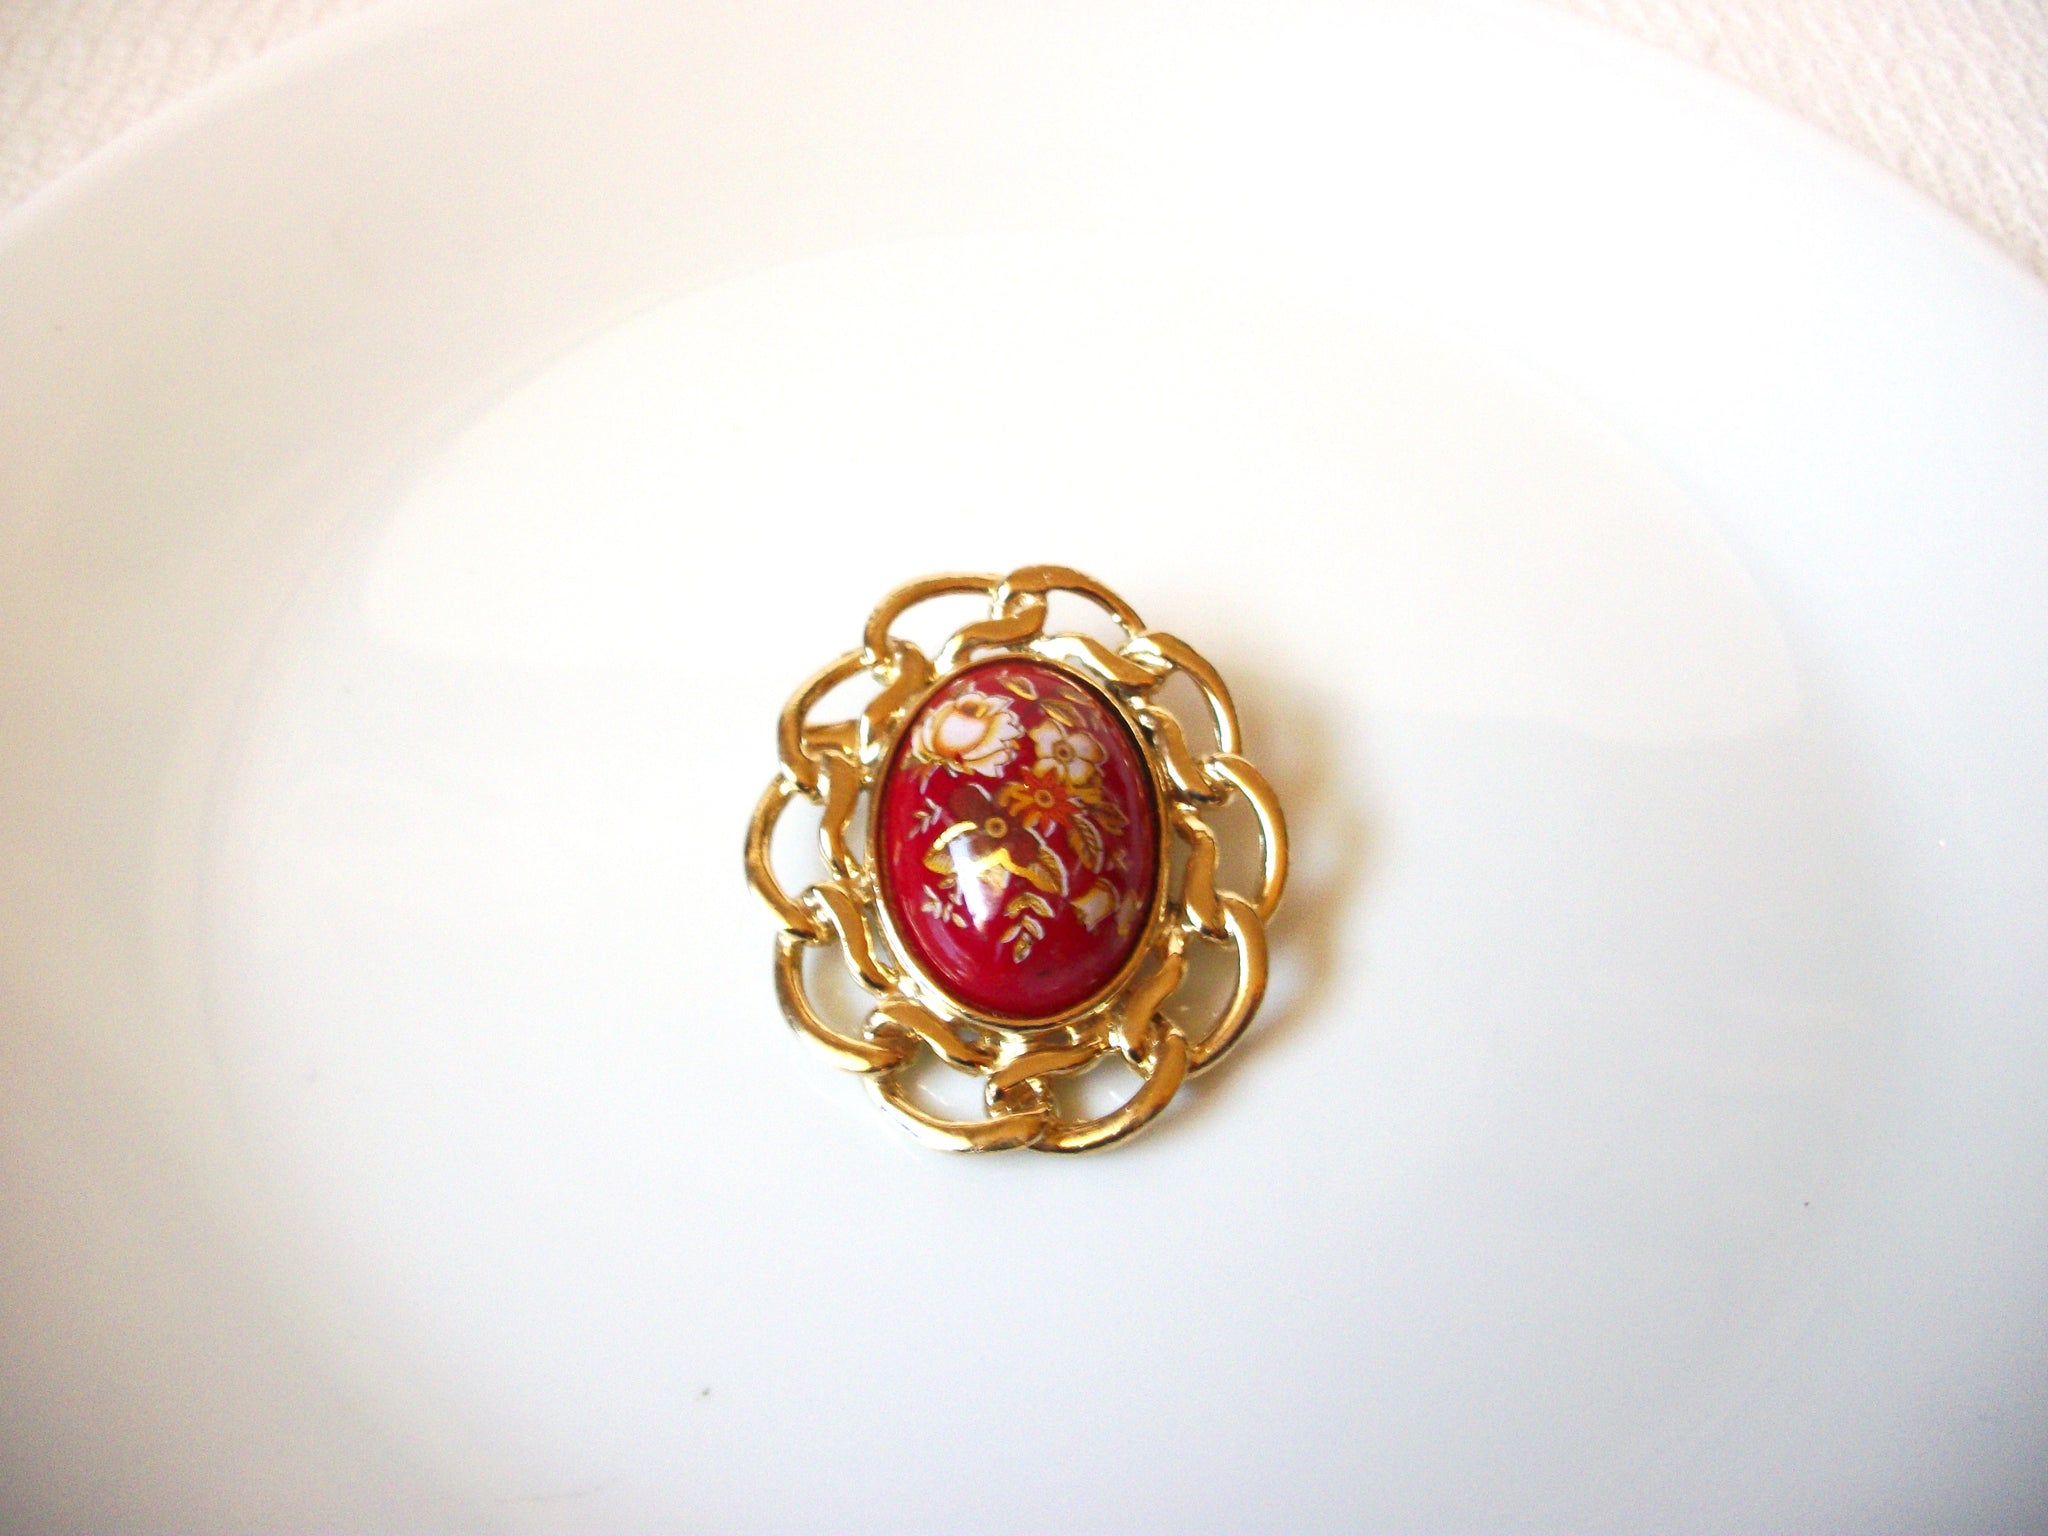 Vintage Floral Hand Painted Glass Brooch Pin 71218S